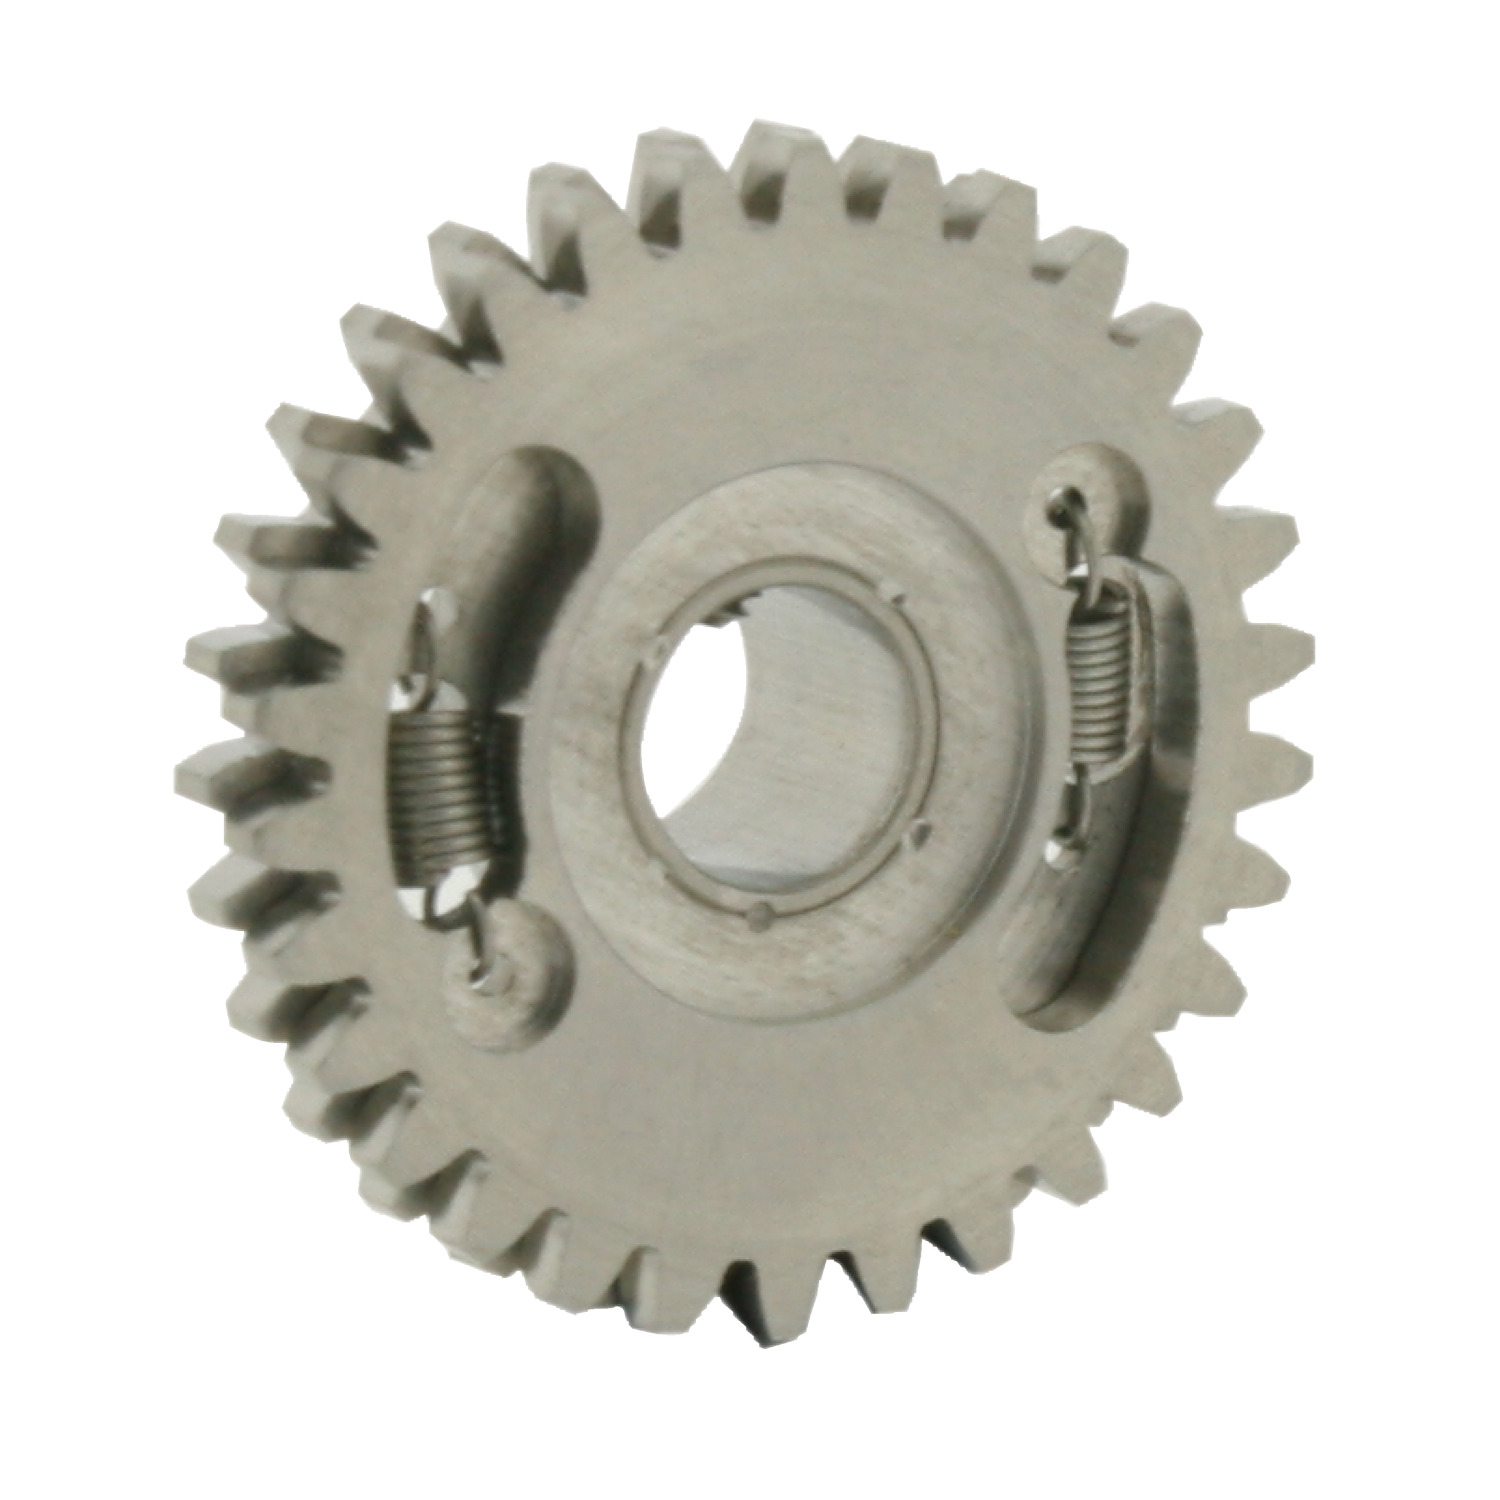 R2088 Hubless Spur Gears